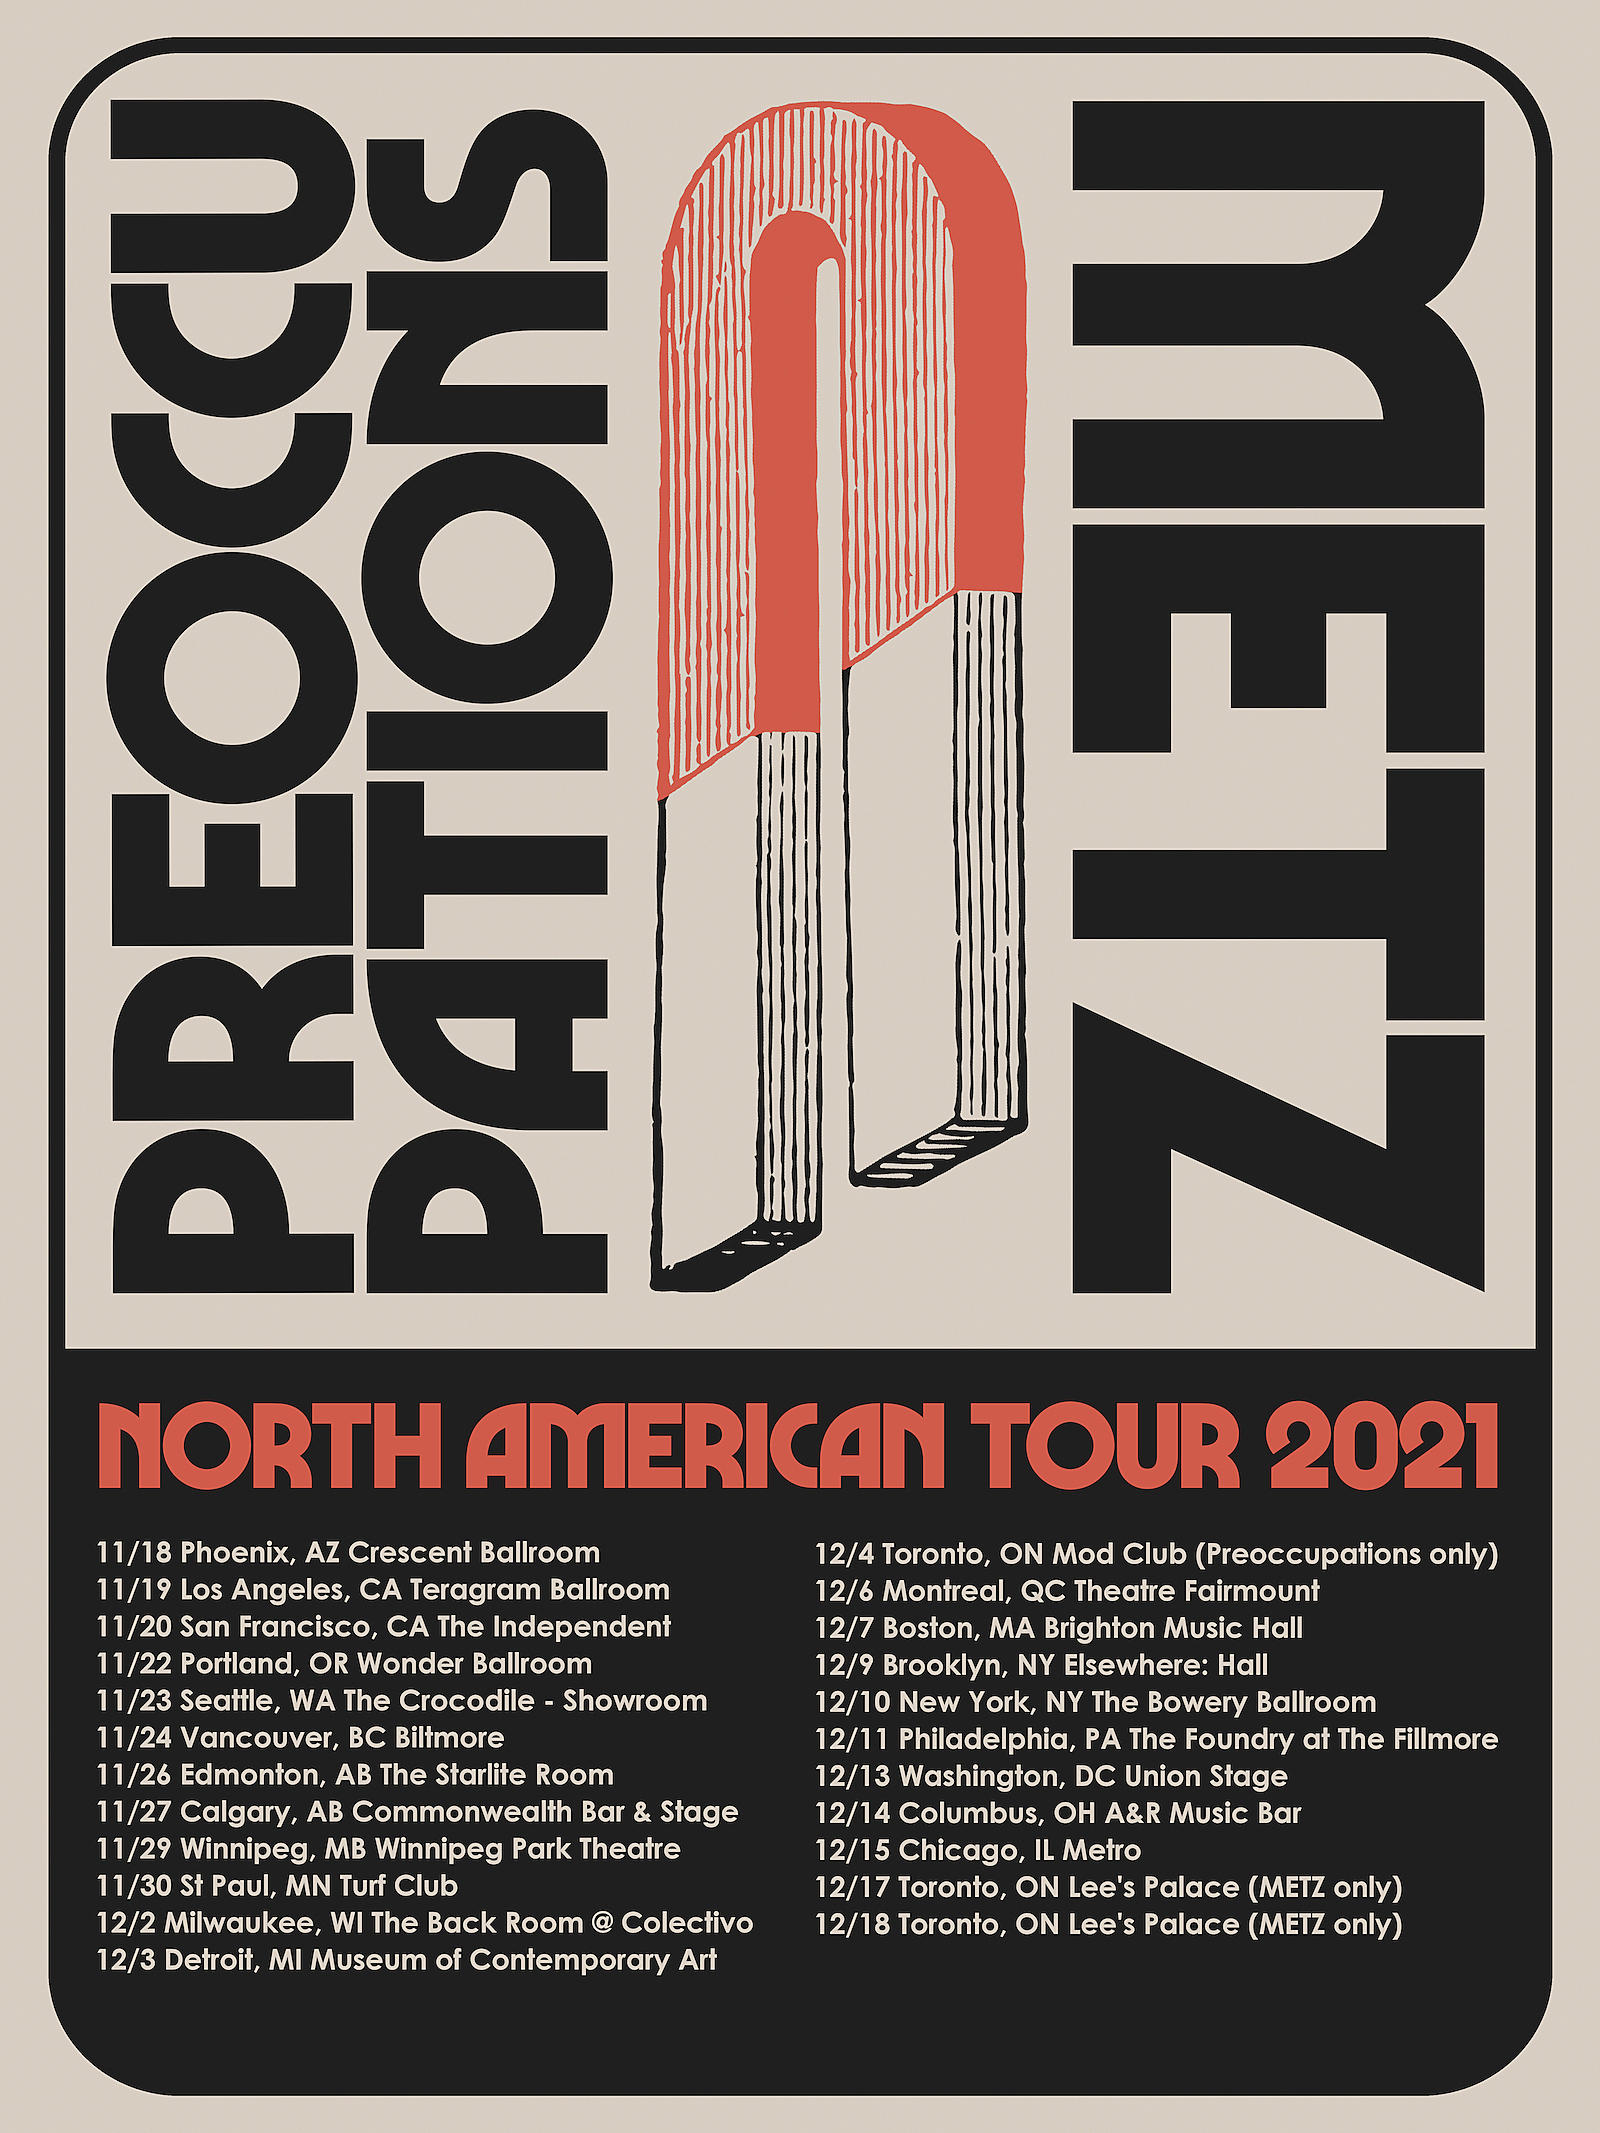 METZ and Preoccupations' upcoming tour, including dates in Brooklyn (December 9), New York (December 10) and Philadelphia (December 11)